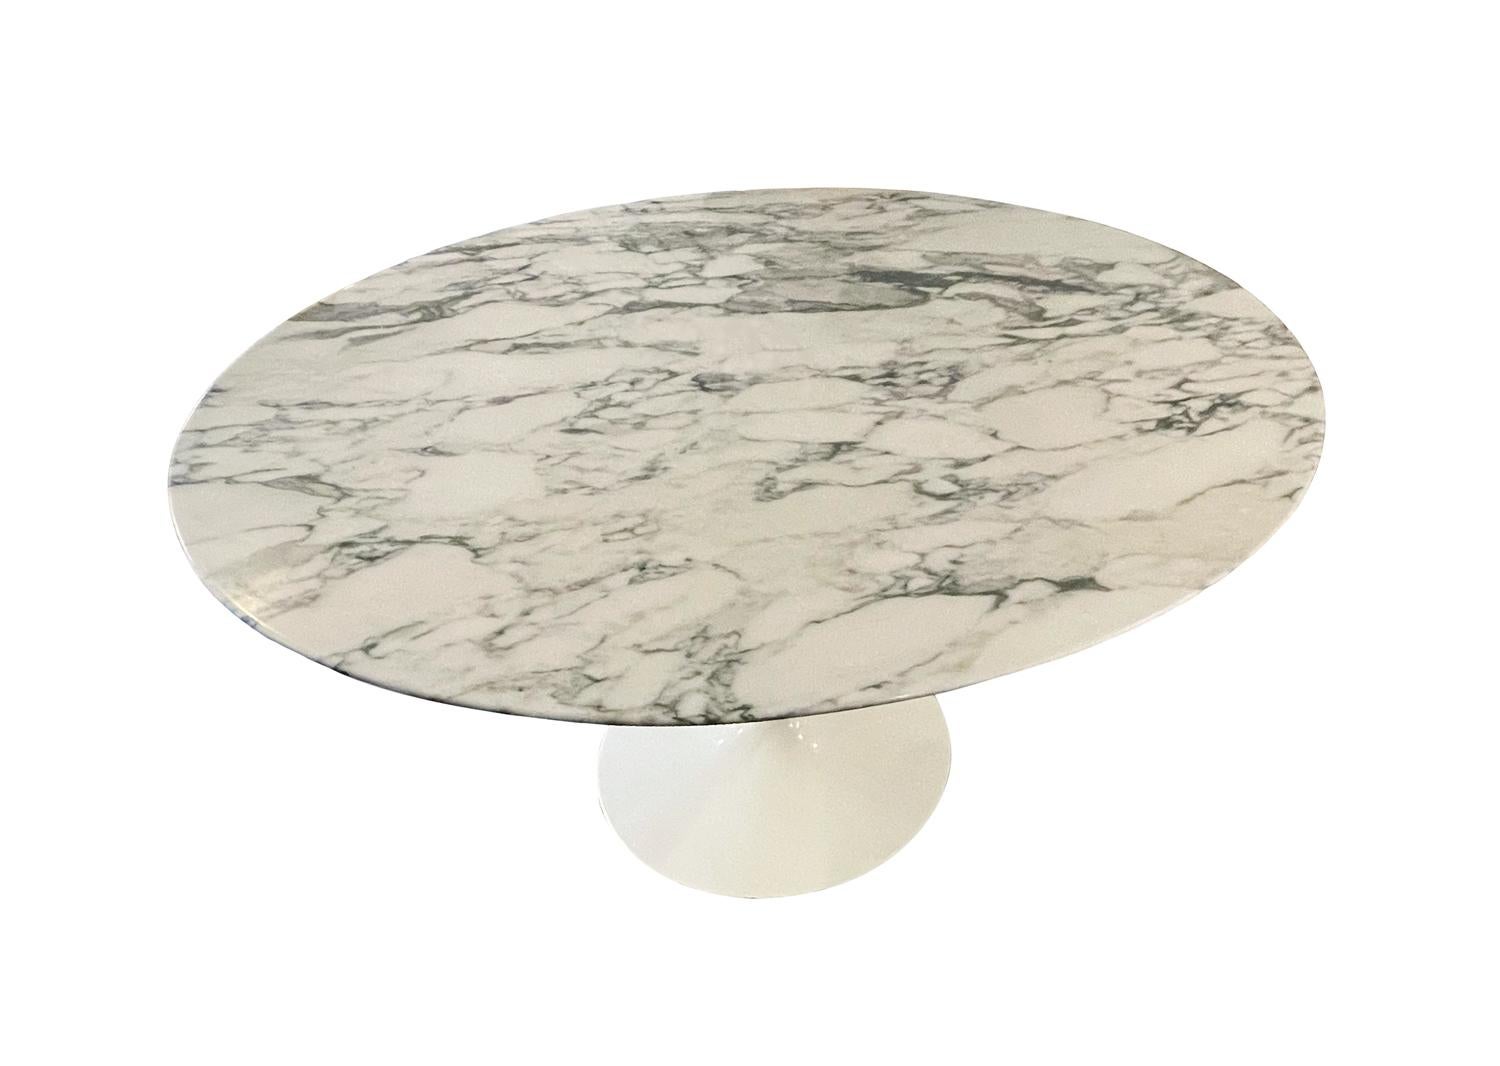 Contemporary Mid-Century Modern Oval Dining Table by Eero Saarinen for Knoll in White Marble